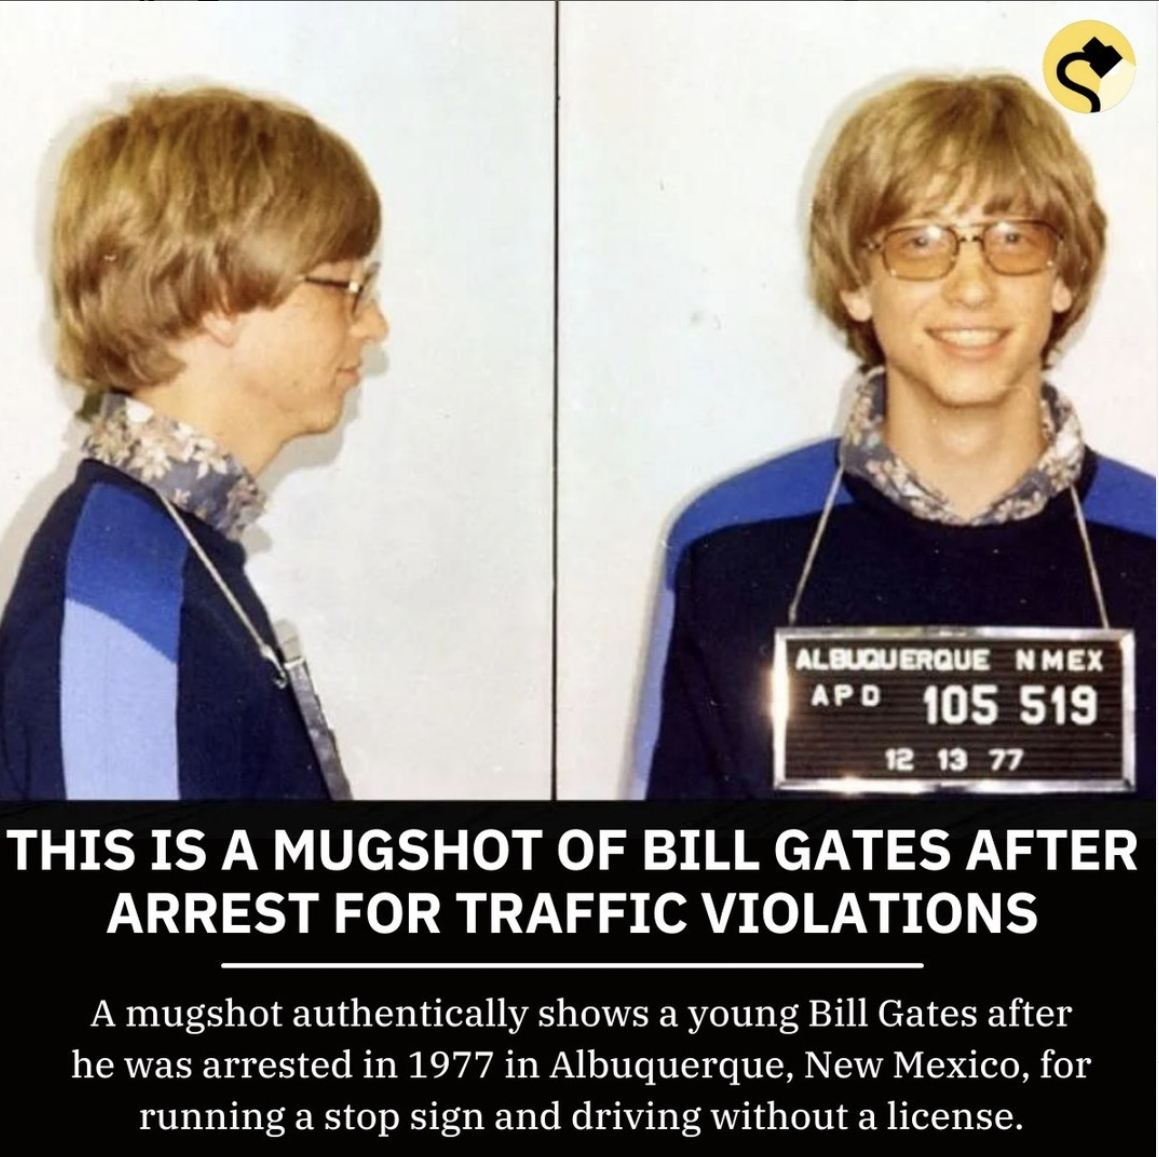 Snopes Facts - bill gates mug shot - Albuquerque Nmex Apd 105 519 12 13 77 This Is A Mugshot Of Bill Gates After Arrest For Traffic Violations A mugshot authentically shows a young Bill Gates after he was arrested in 1977 in Albuquerque, New Mexico, for r